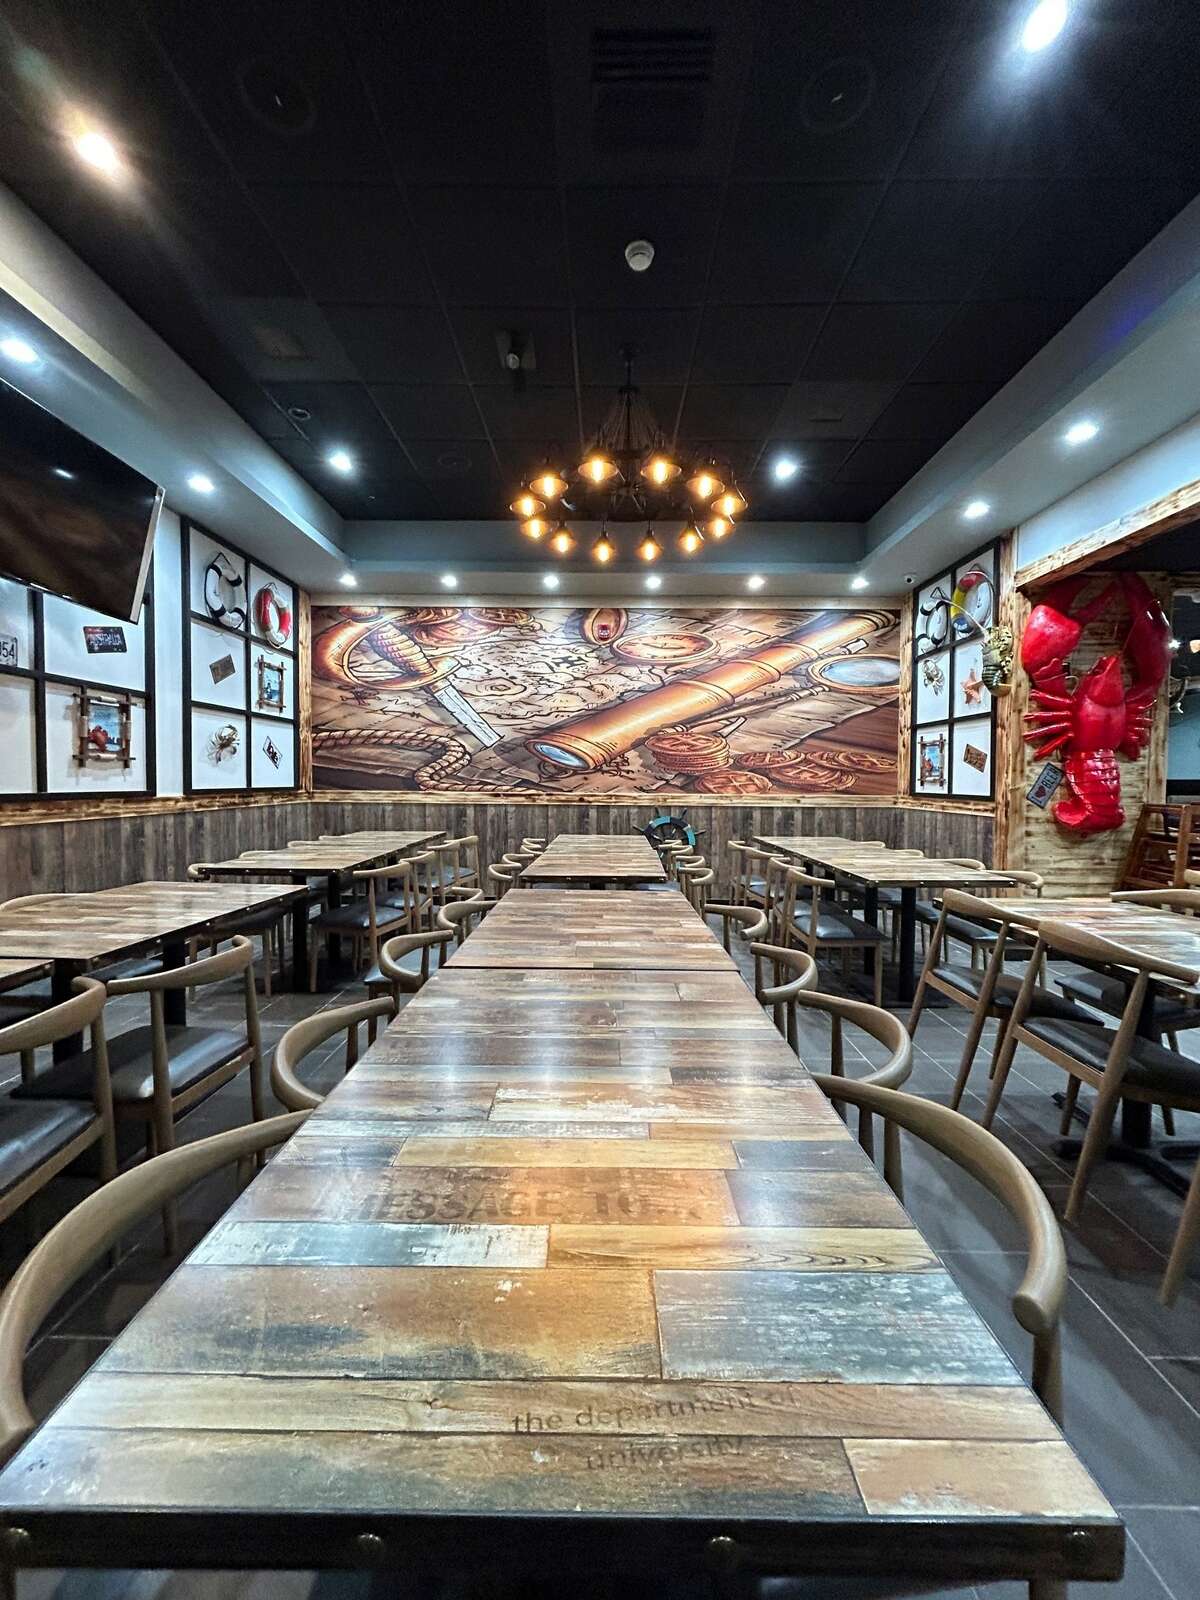 Aloha Krab, a Cajun seafood restaurant with locations in New York, New Jersey and Maryland, has officially opened its new location at the Crossgates Mall, marking its debut in the Capital Region.  